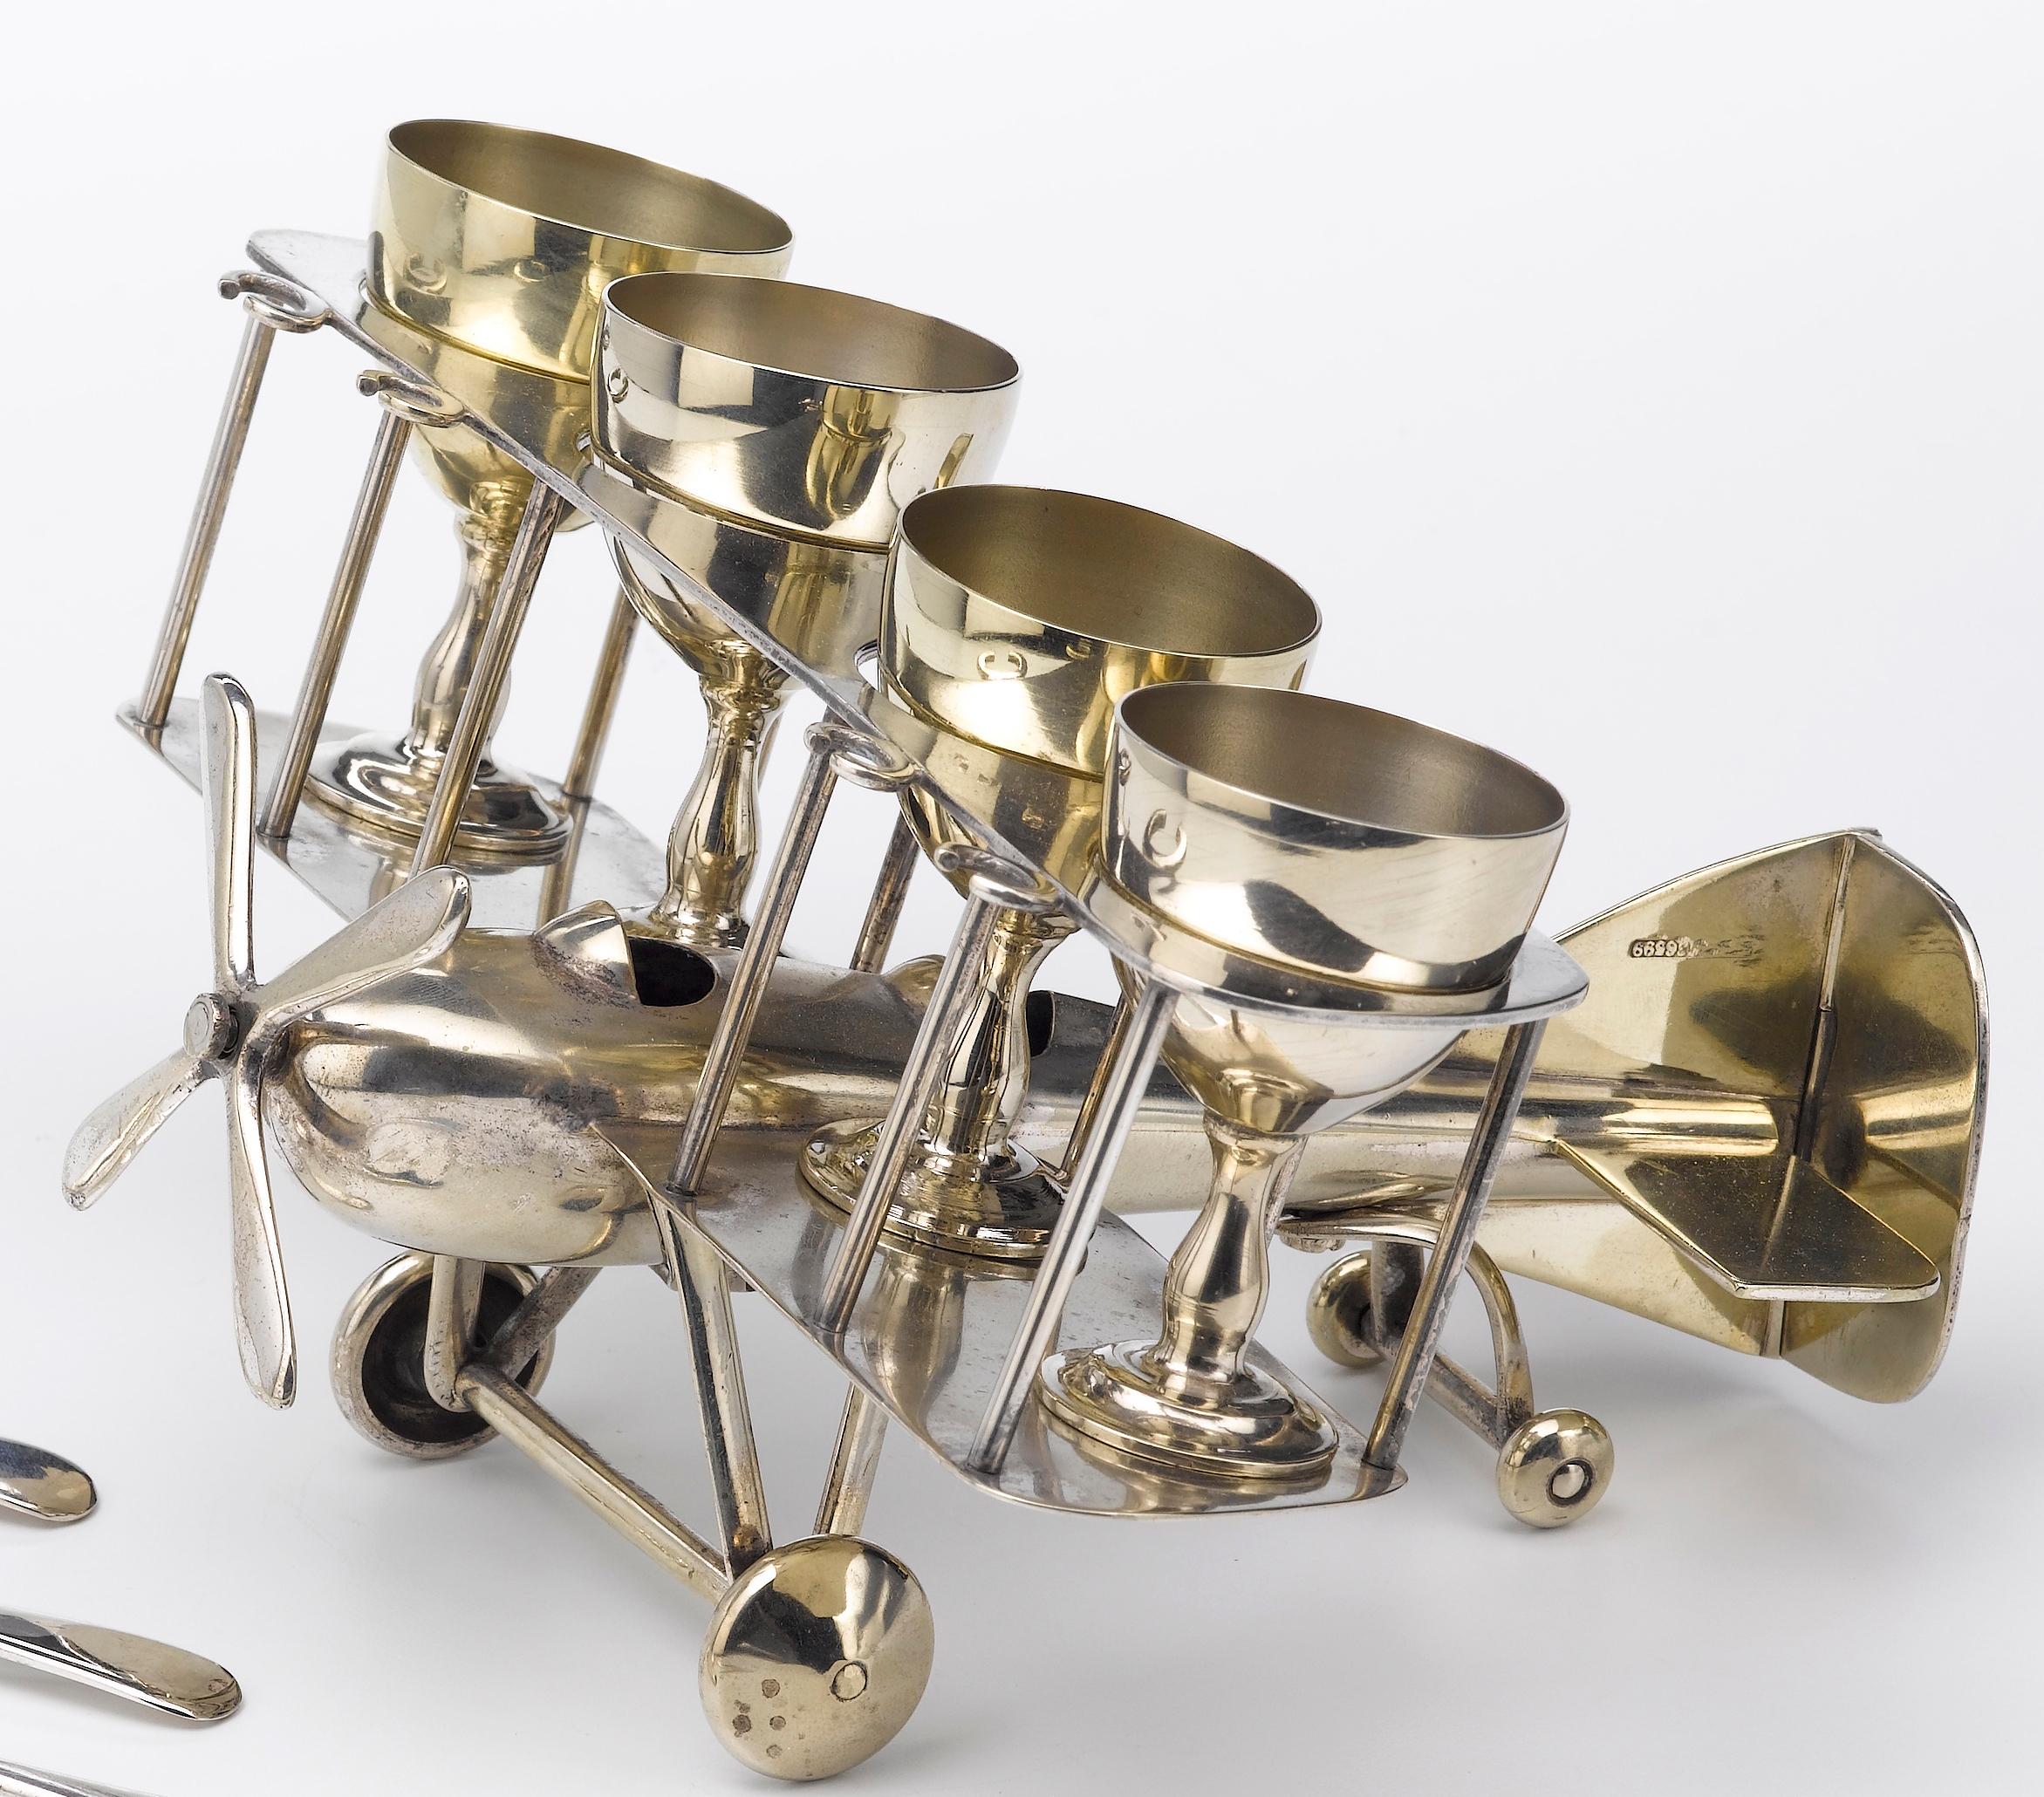 This is a beautiful silver-plated egg cup and spoon set with an airplane motif, dating to the early 1910s. The set includes four matching footed egg cups. The cups sit upon the stacked wings of a biplane. Four small egg spoons accompany the set. The